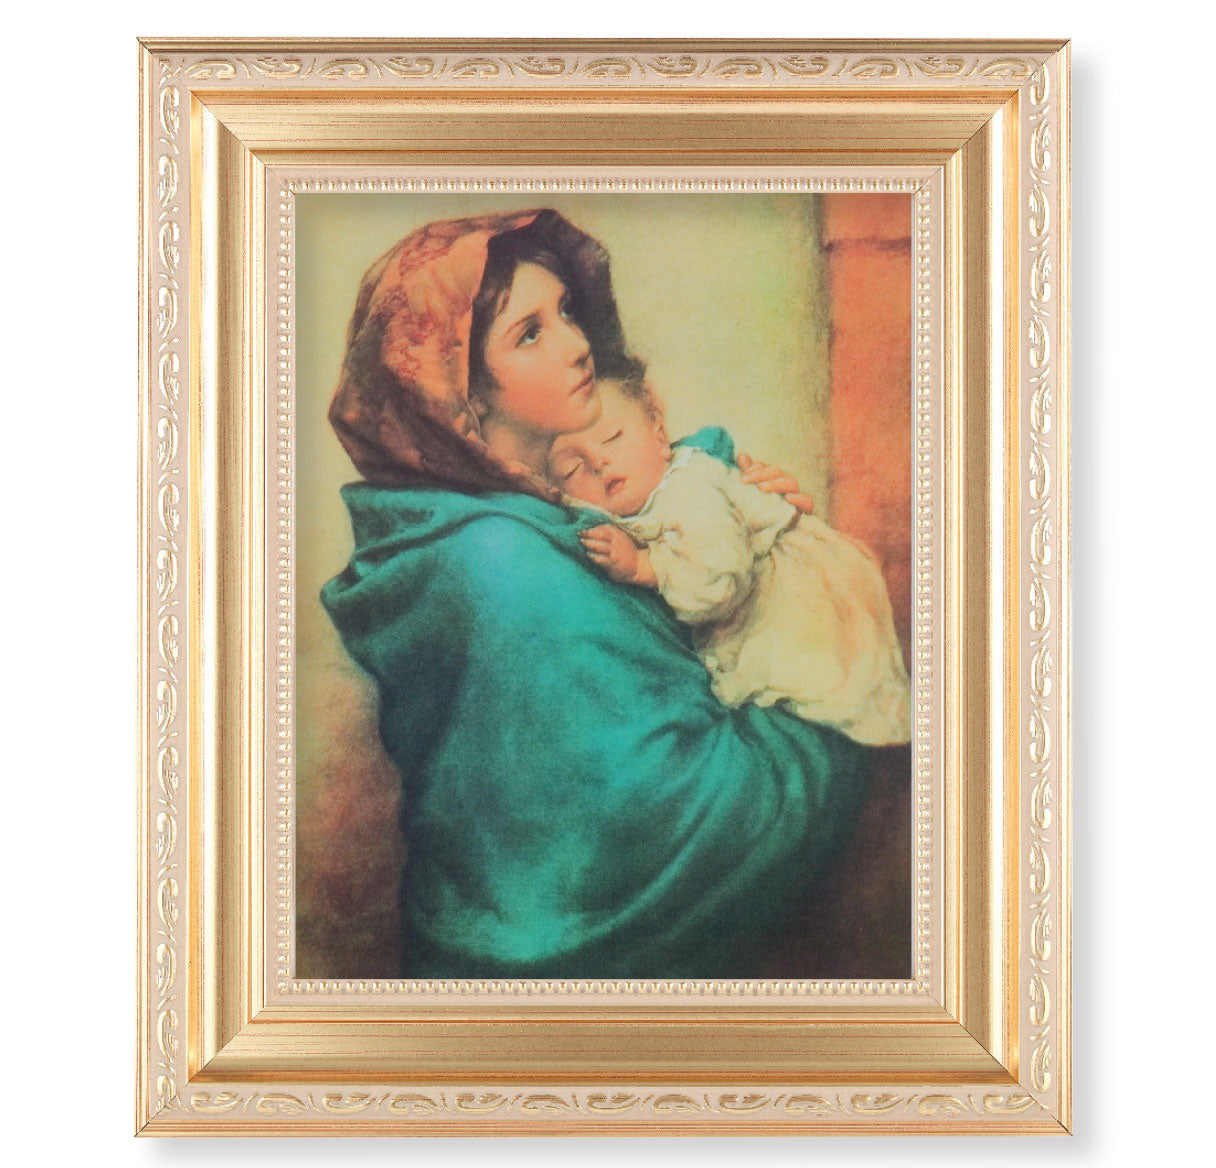 Madonna of the Streets Picture Framed Wall Art Decor, Large, Satin Gold Fluted Frame with Distressed Finish and Fine Detailed Scrollwork